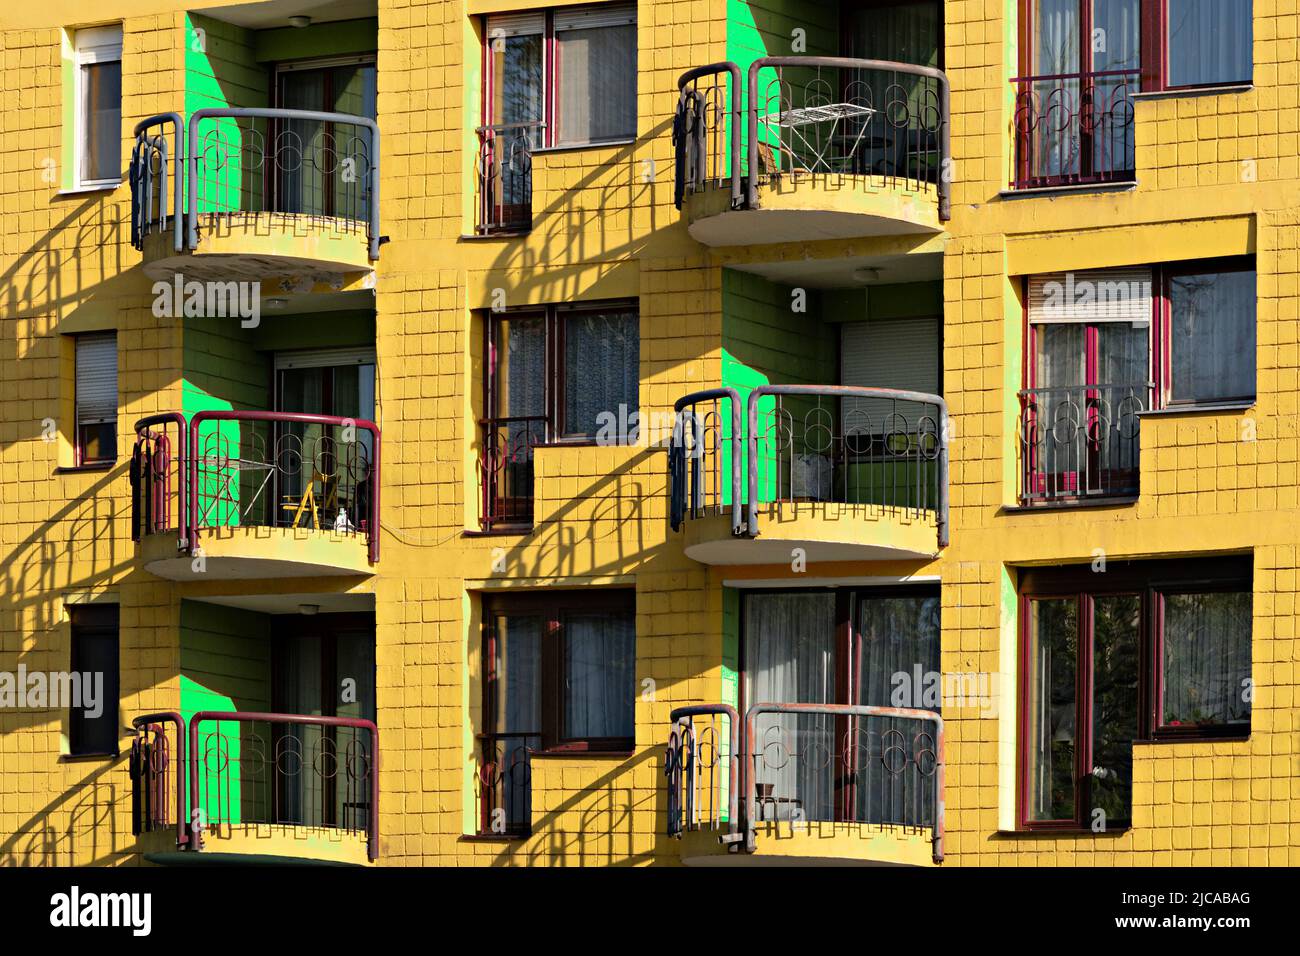 Colorful apartment building painted yellow and green, in Sarajevo, Bosnia and Herzegovina Stock Photo